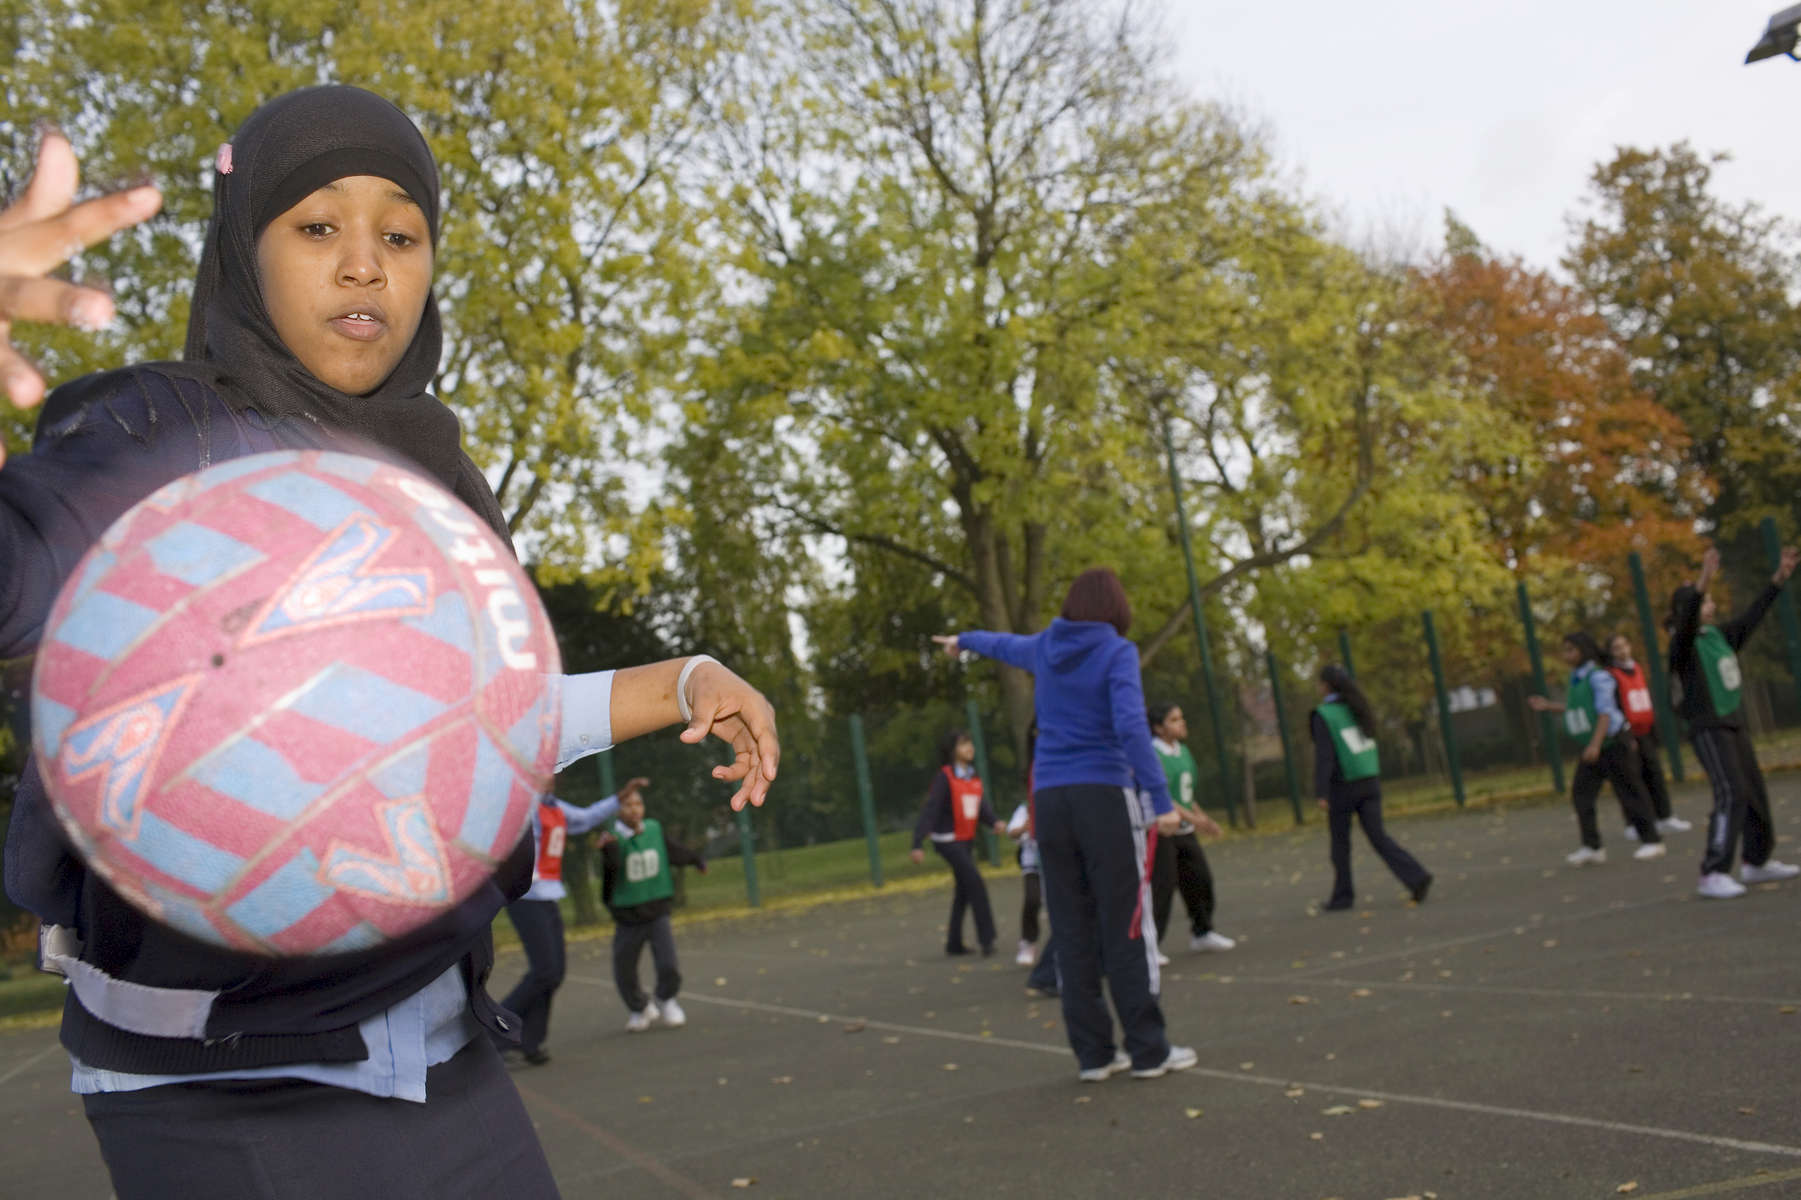 The Tuesday after school netball club in action on one of the outside courts at Villiers High School. Staff at Villiers urge parents to actively encourage their children to attend at least one extra curricular club. Netball is particularly popular with female pupils from South Asia.Villiers High School is in the town of Southall. It has a very wide ethnic diversity. 45 different 1st spoken languages are listed among the 1208 pupils. 25 ethnic groups are represented with Indian, Pakistani and Black-Somali the three highest.Southall is a suburban district of West London, England. The town has one of the largest concentrations of South Asian people outside of the Indian sub-continent. Over 55% os Southall's population of 70,000 is Indian/Pakistani, with less than 10% being White British.